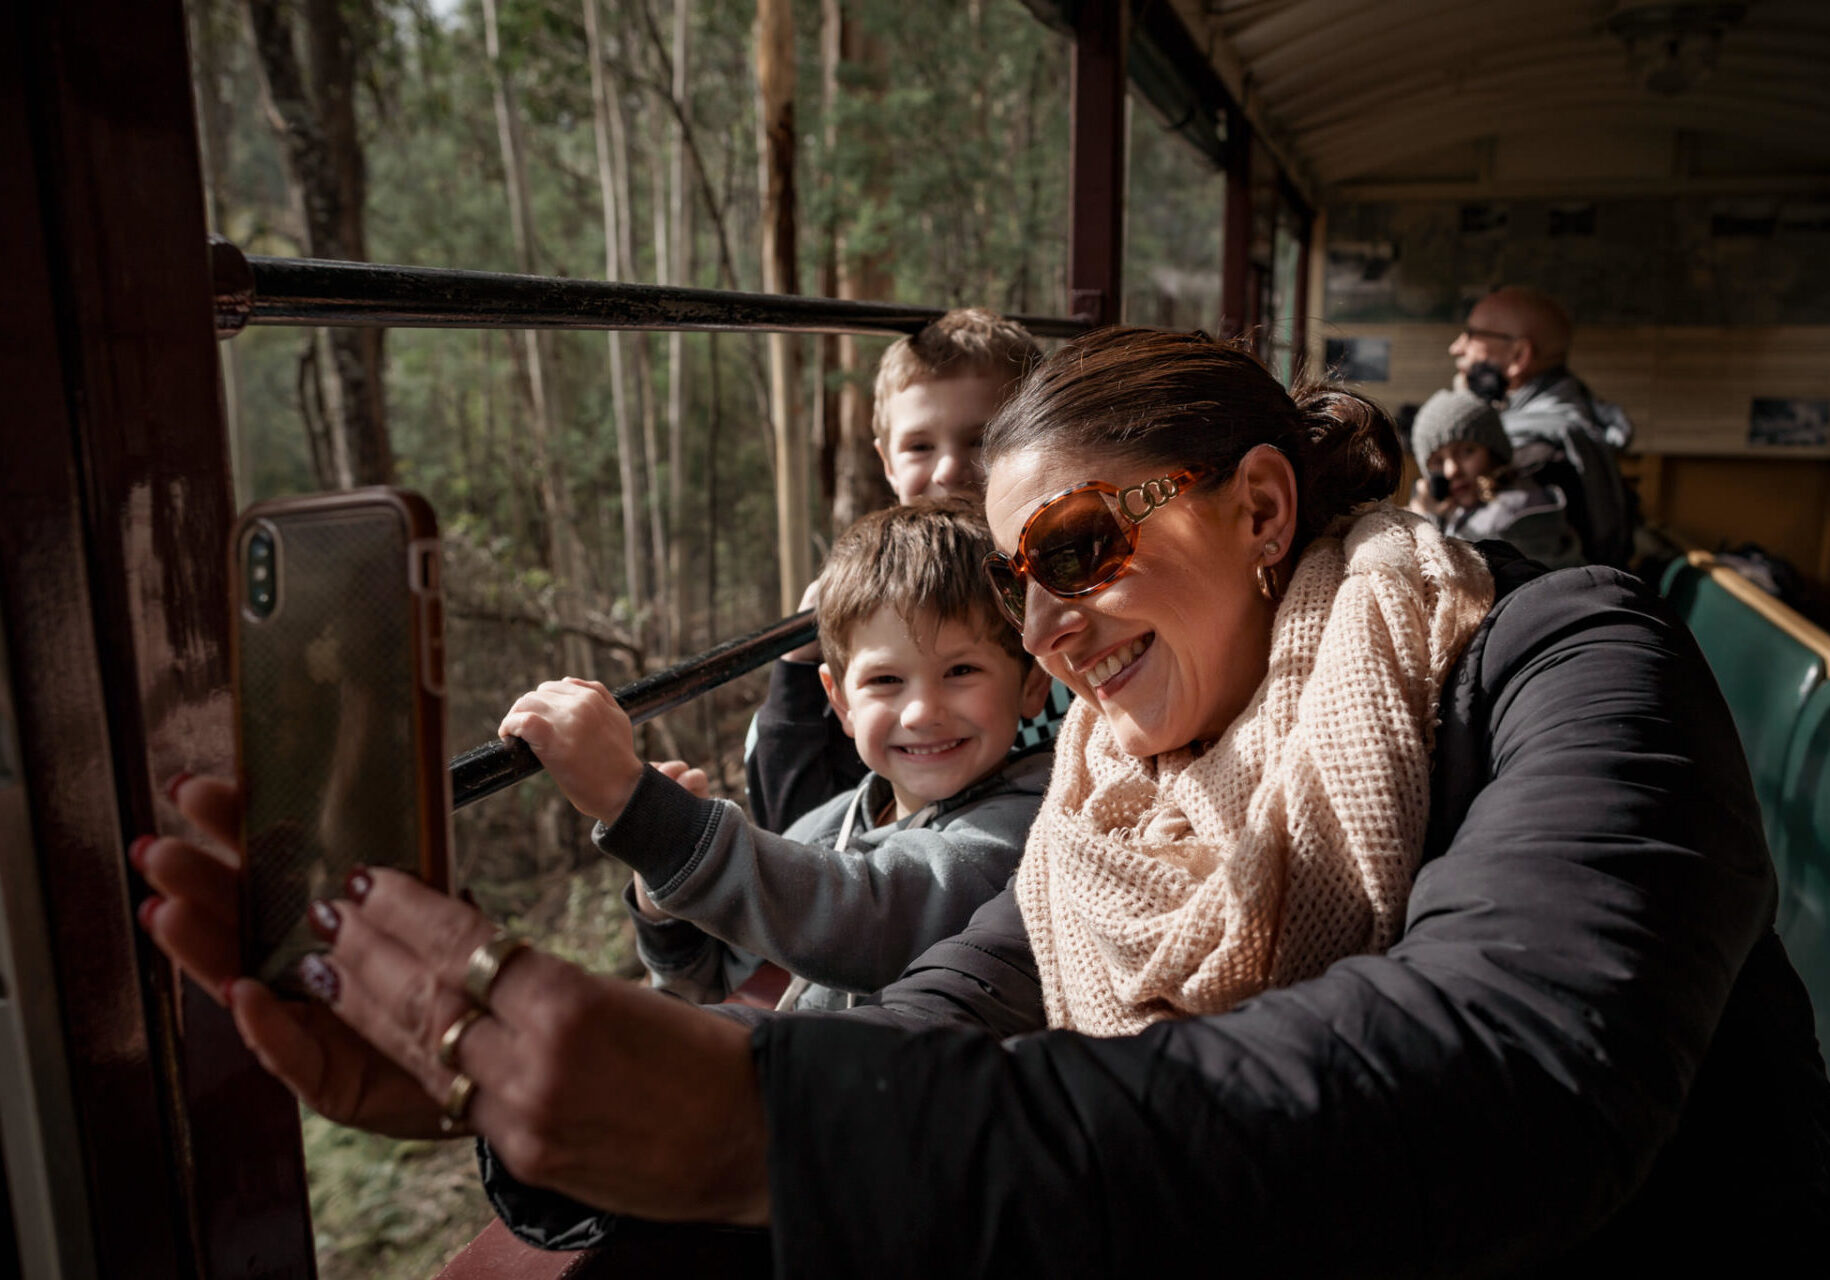 A woman and two children inside an open side train carriage. They are taking a selfie and are smiling at the camera.